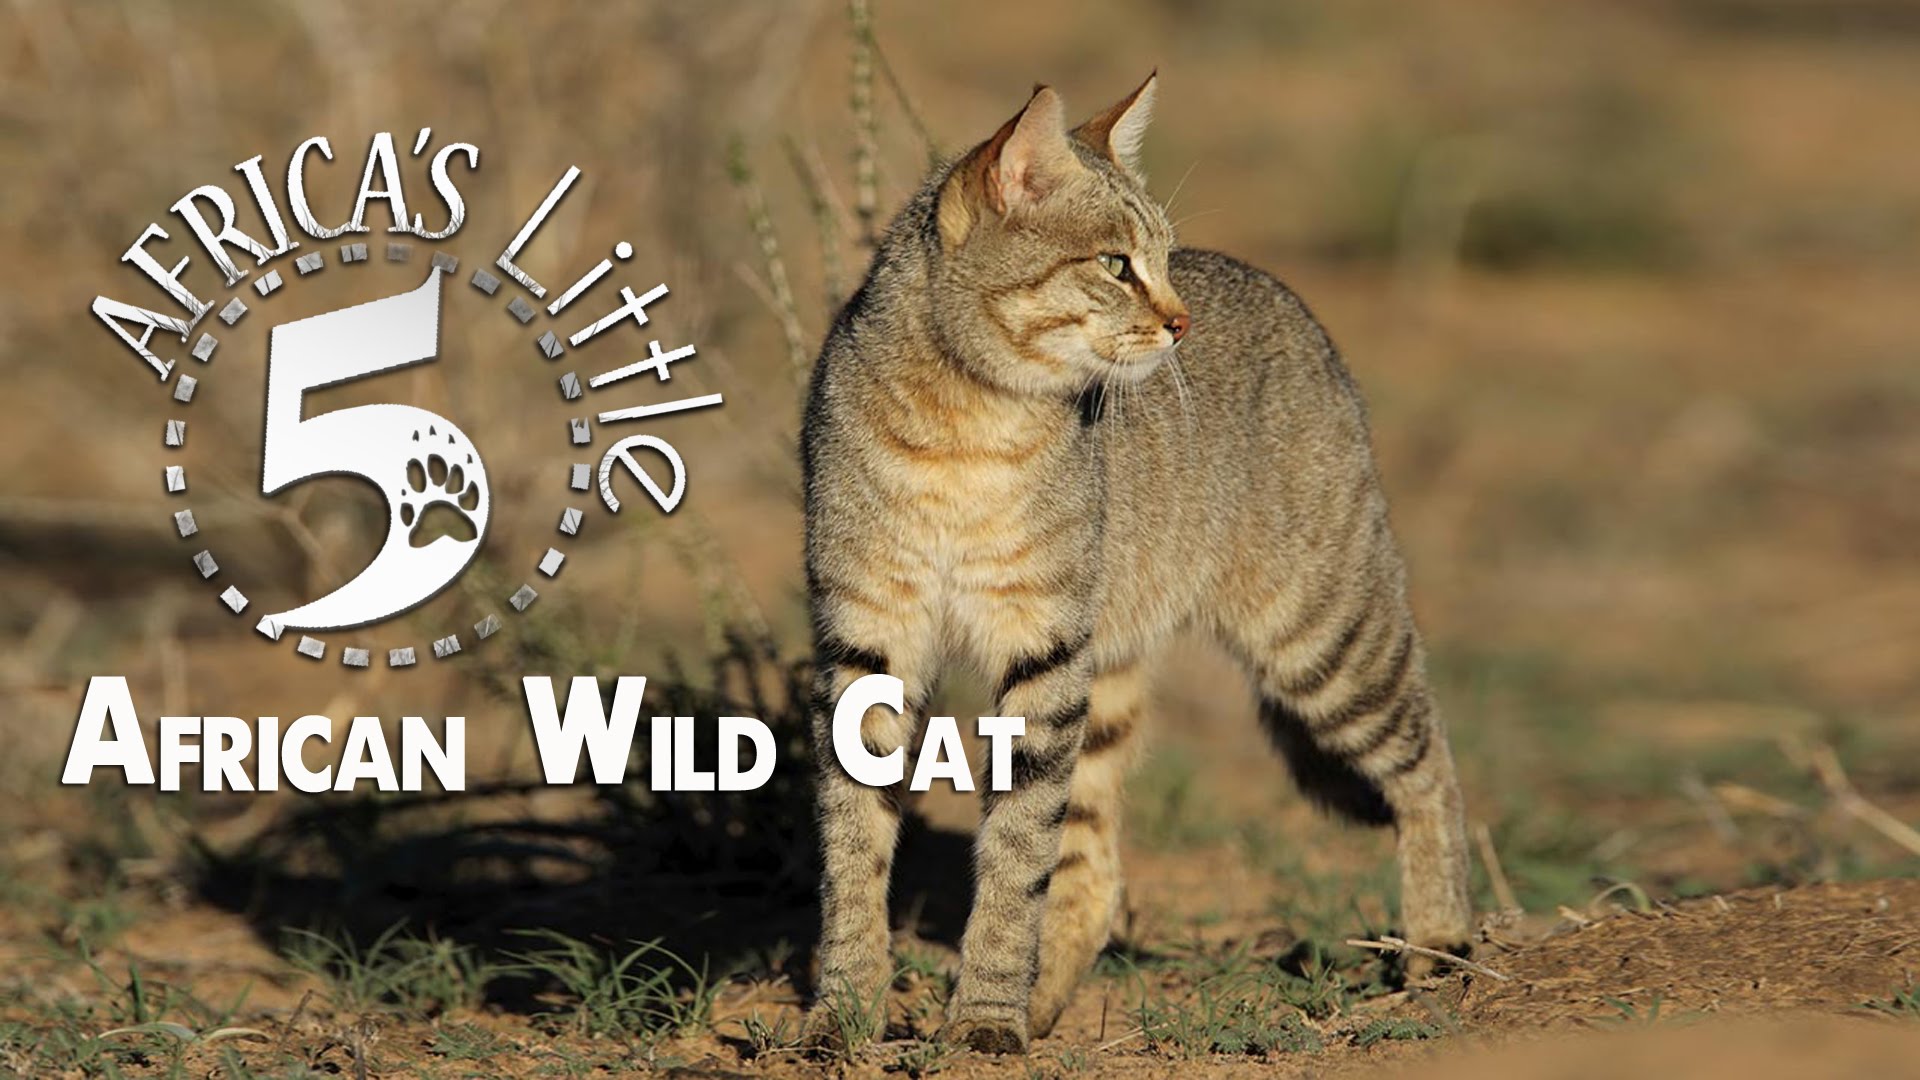 African Wild Cat | AFRICA'S LITTLE 5 - YouTube